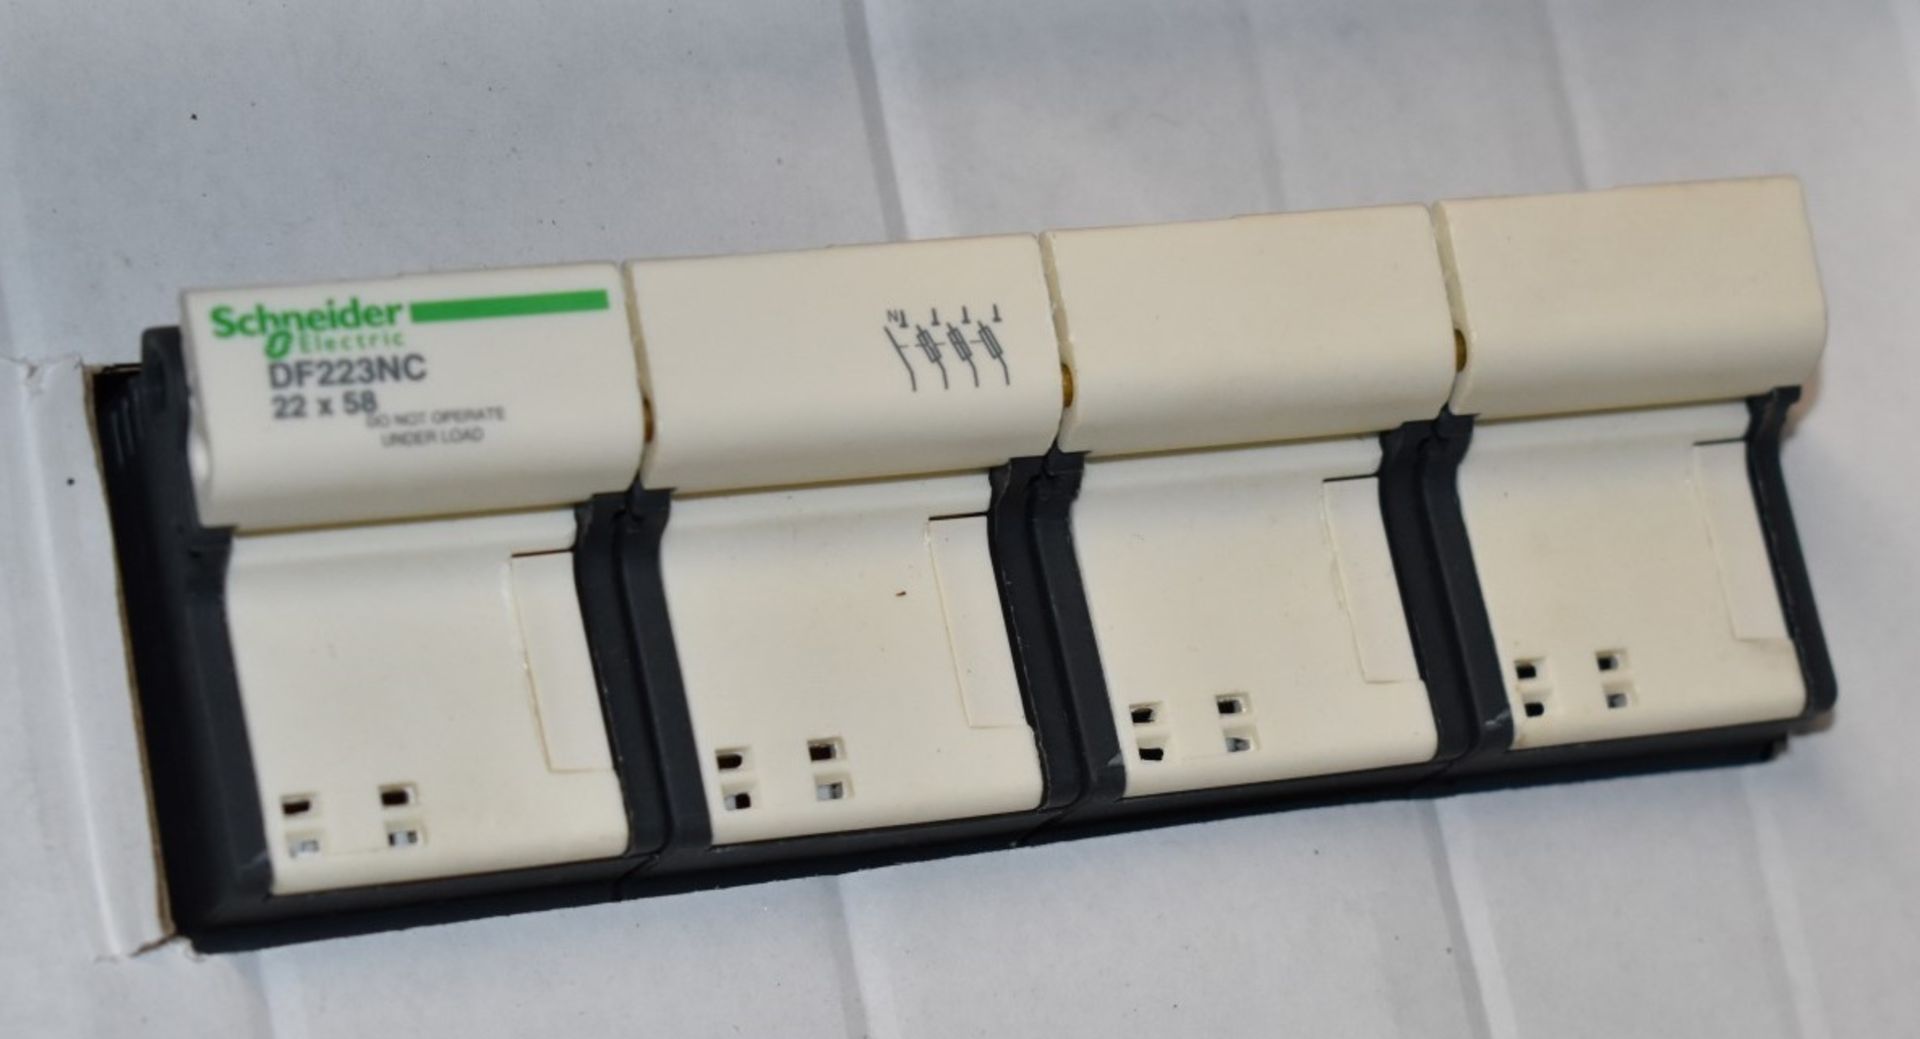 1 x Schneider Electric 125A Rail Mount Fuse Holder - New Boxed Stock - Product Code: DF223NC - Image 3 of 3